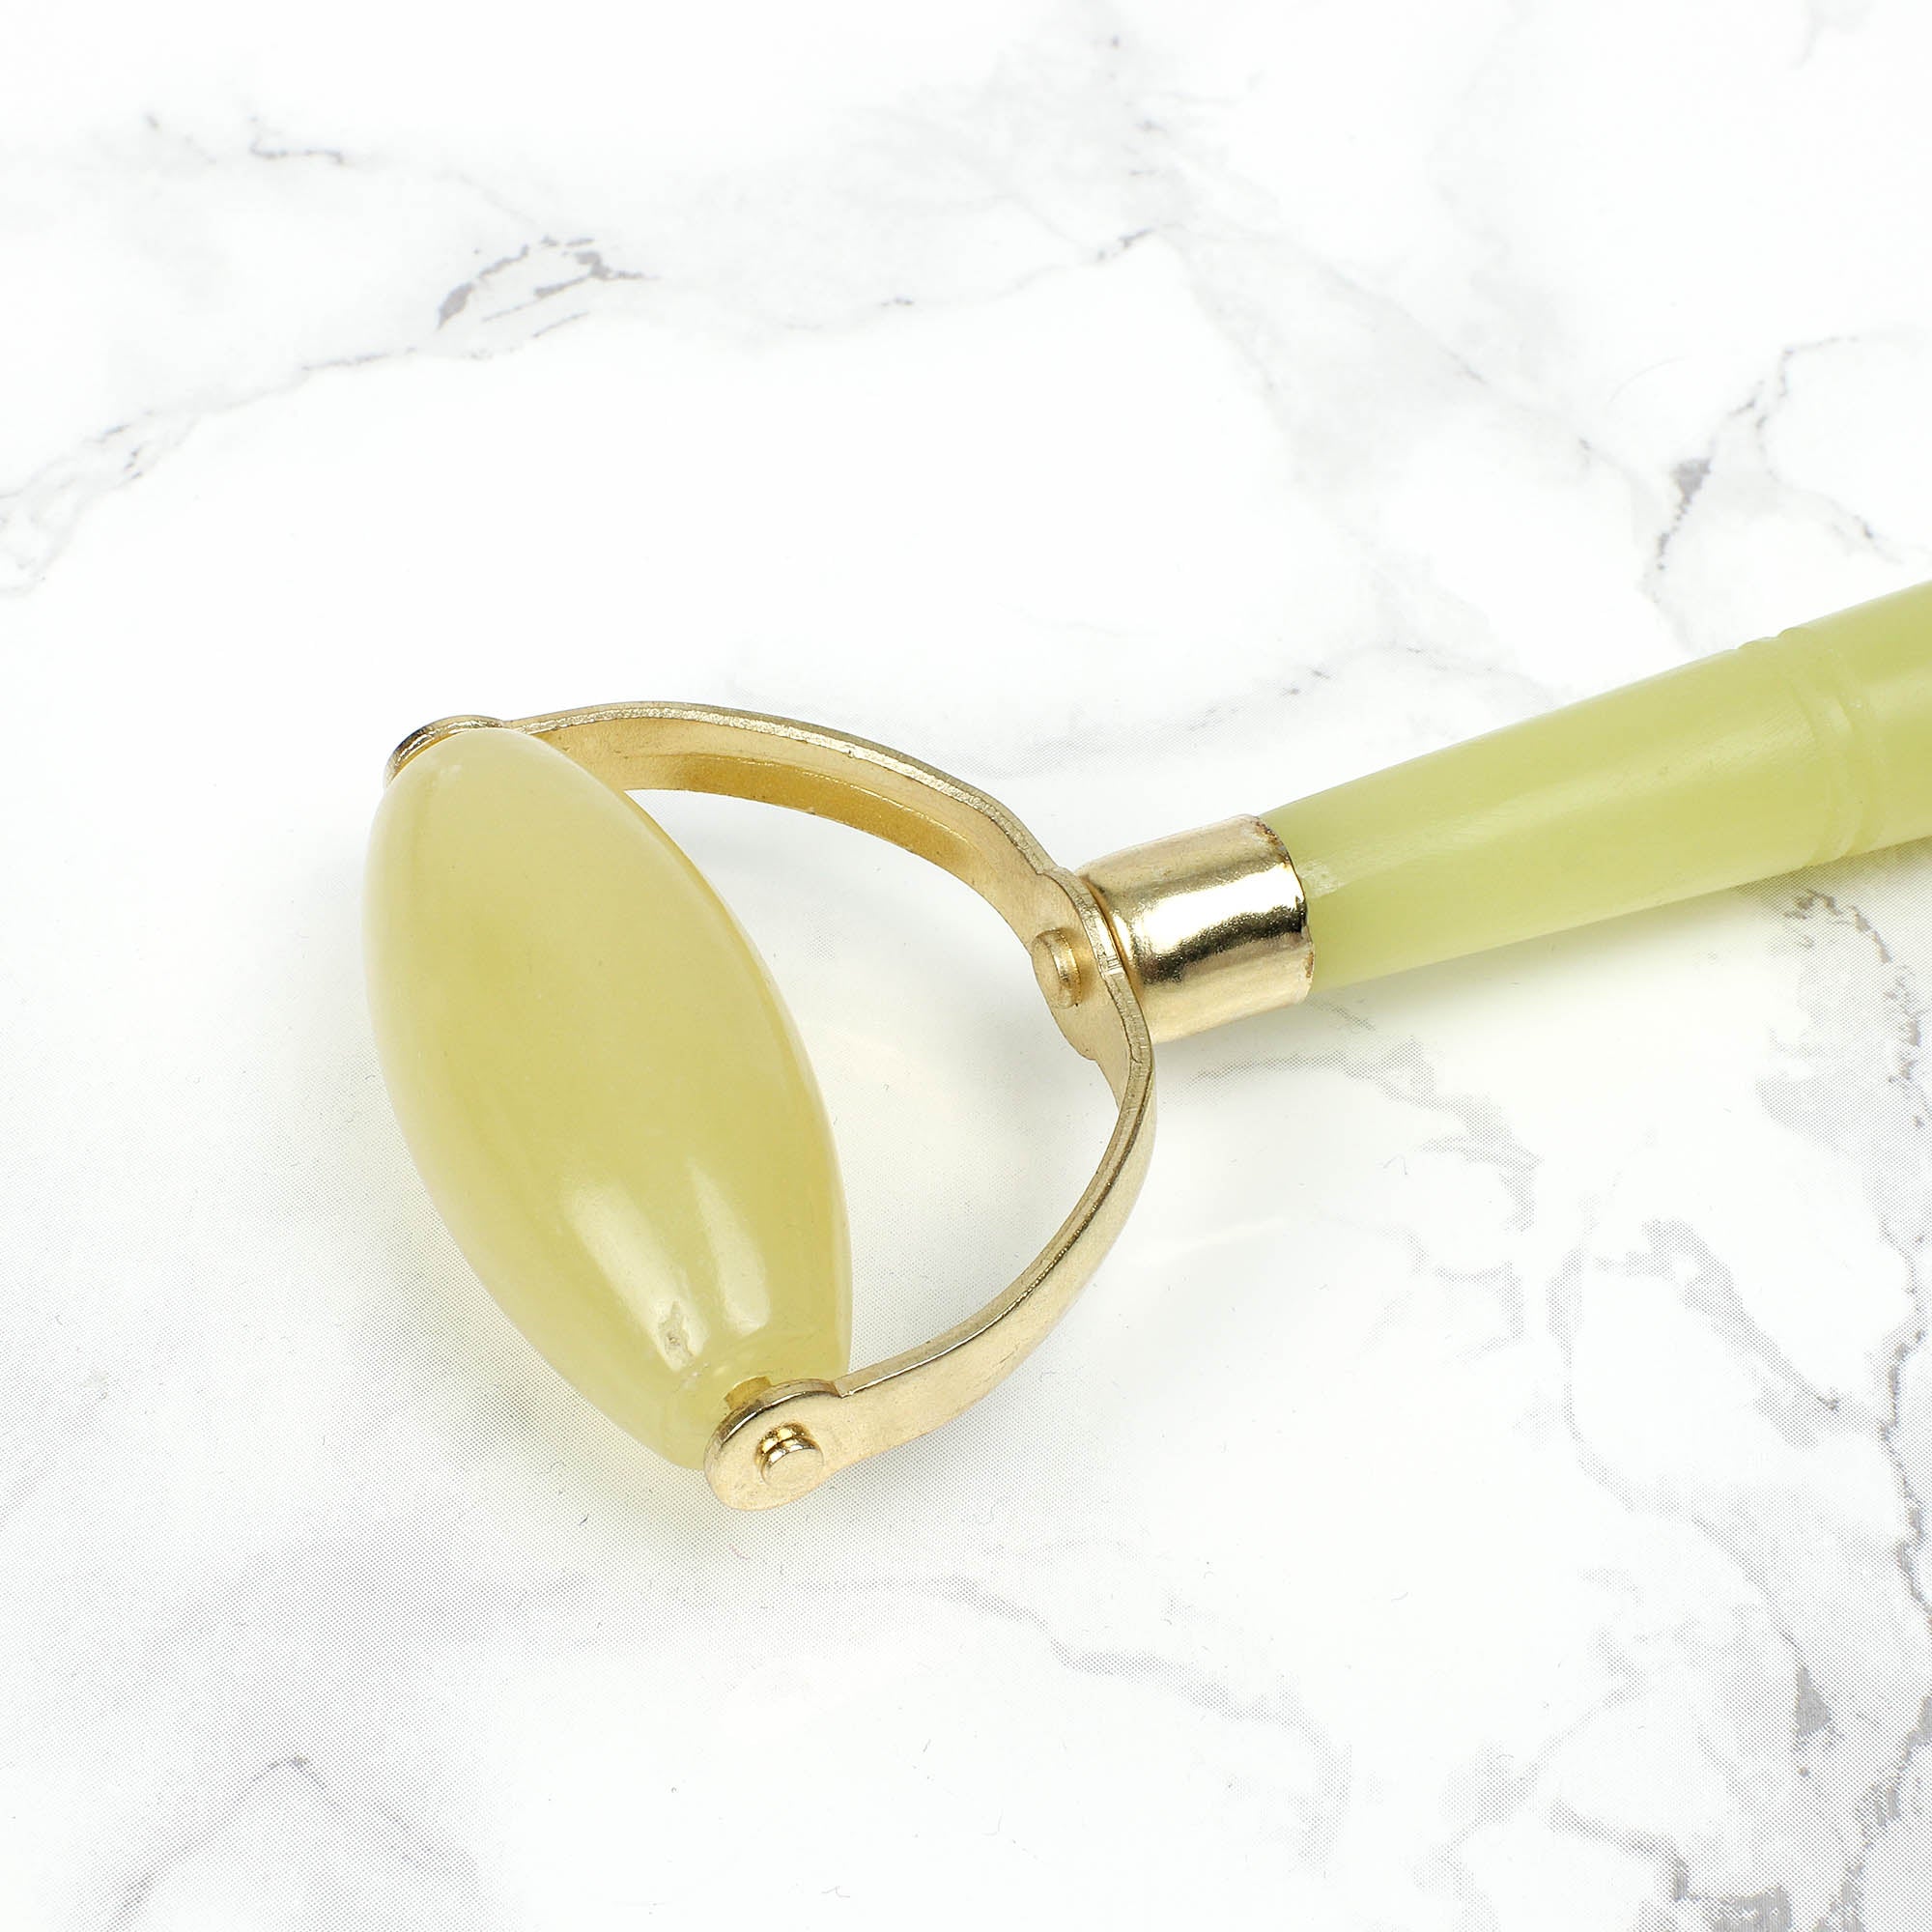 Natural Chemical Free Jade Crystal Roller in a silk lined Box -